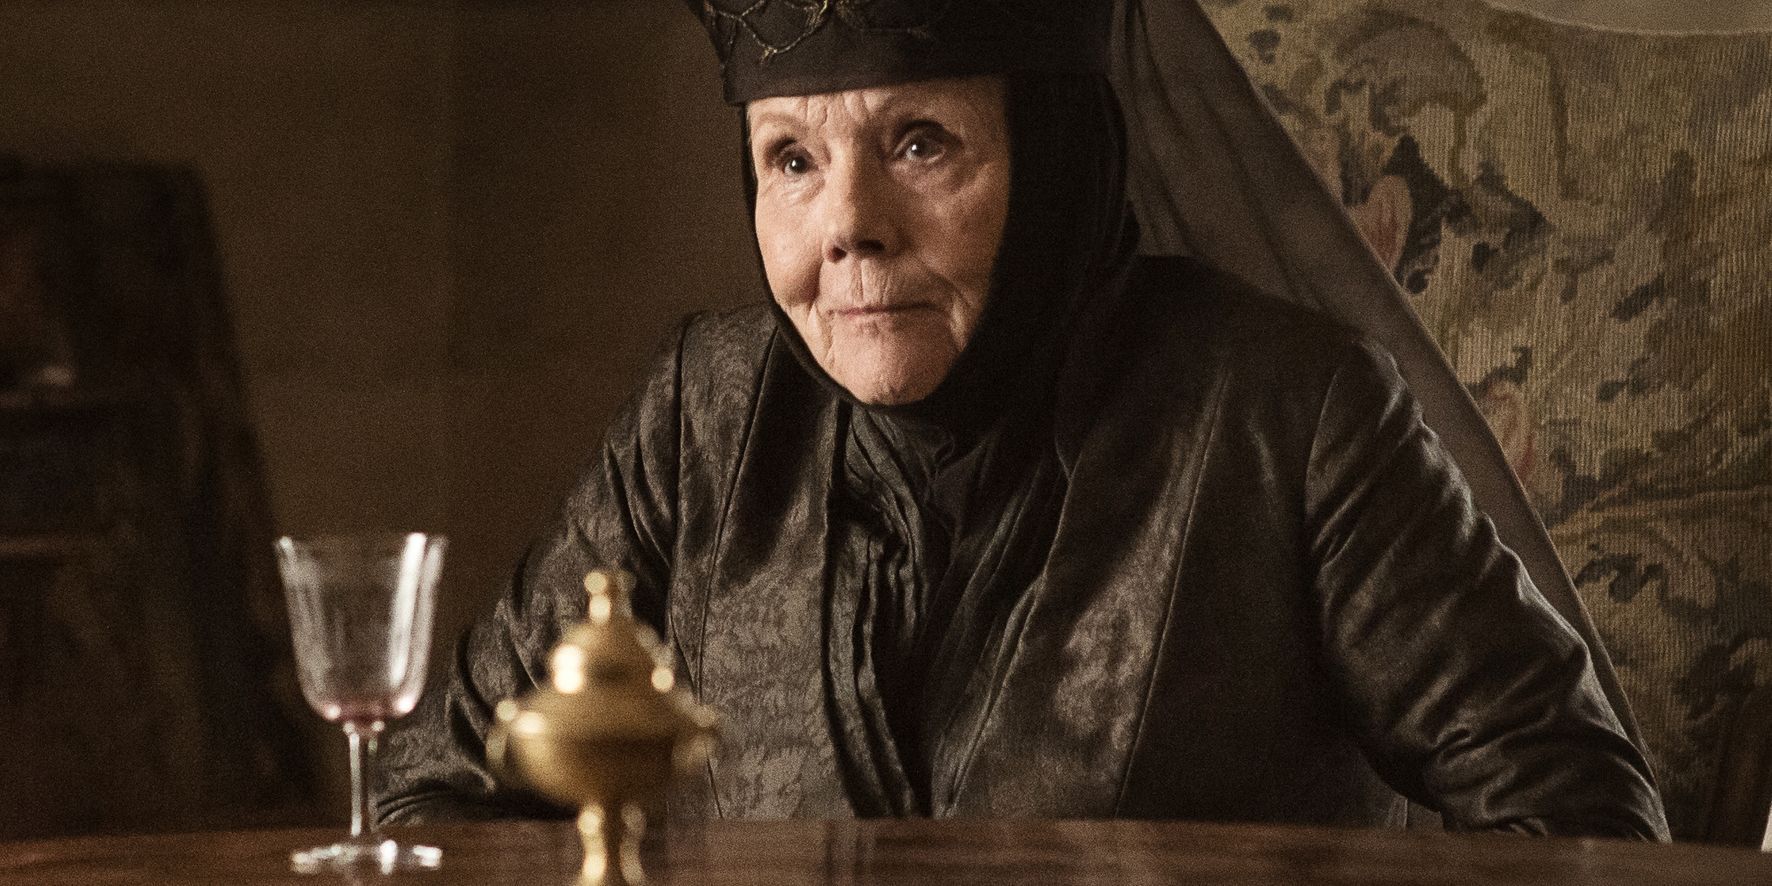 Olenna Tyrell confesses to Joffrey's murder